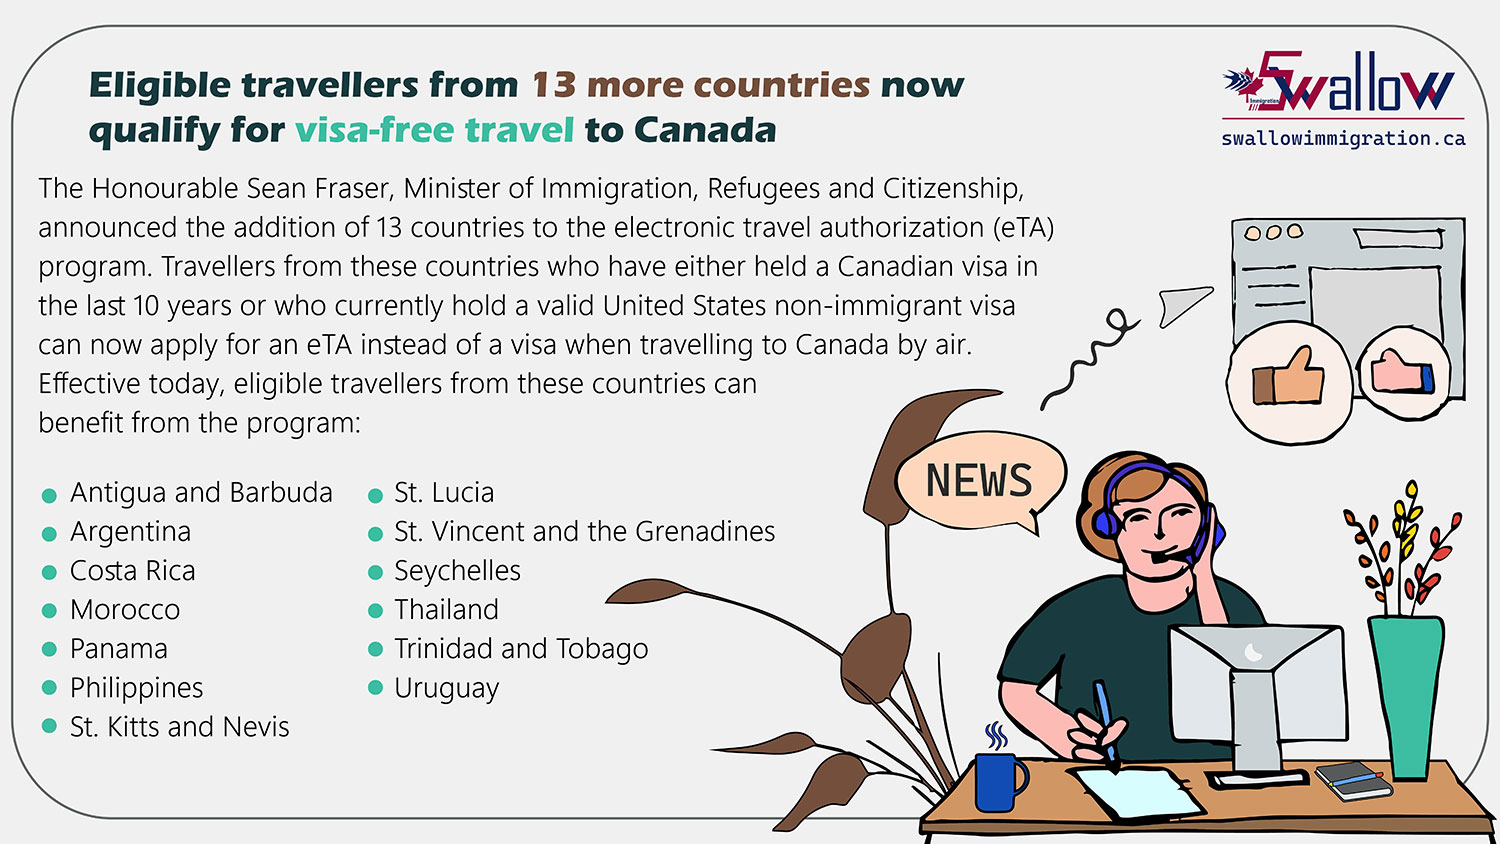 Eligible travellers from 13 more countries now qualify for visa-free travel to Canada